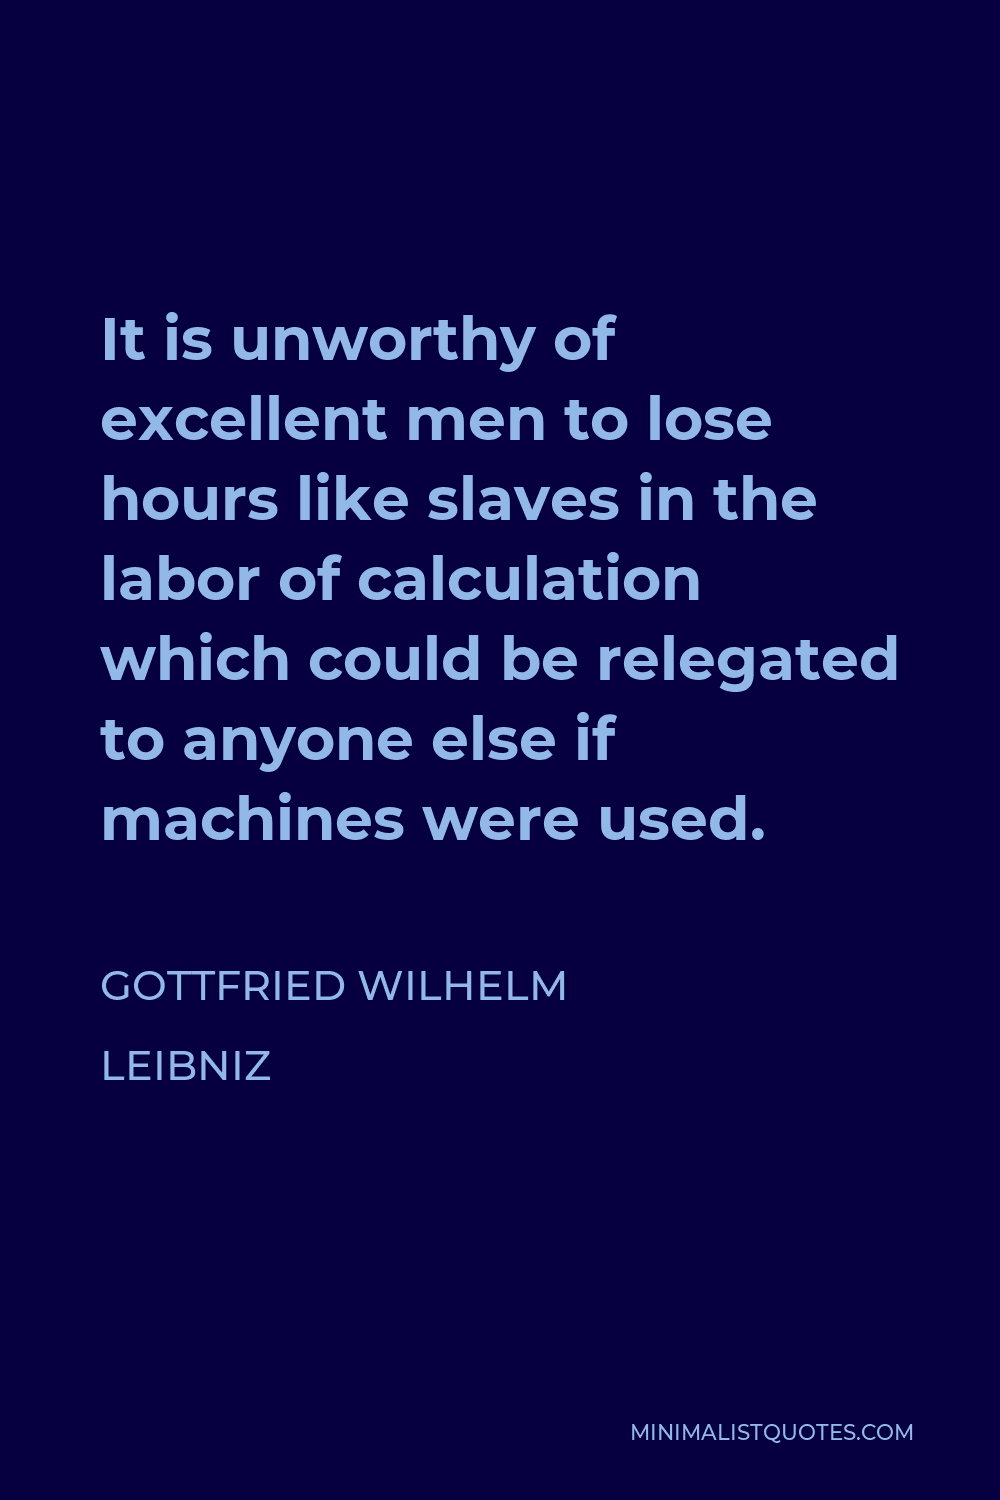 Gottfried Wilhelm Leibniz Quote - It is unworthy of excellent men to lose hours like slaves in the labor of calculation which could be relegated to anyone else if machines were used.